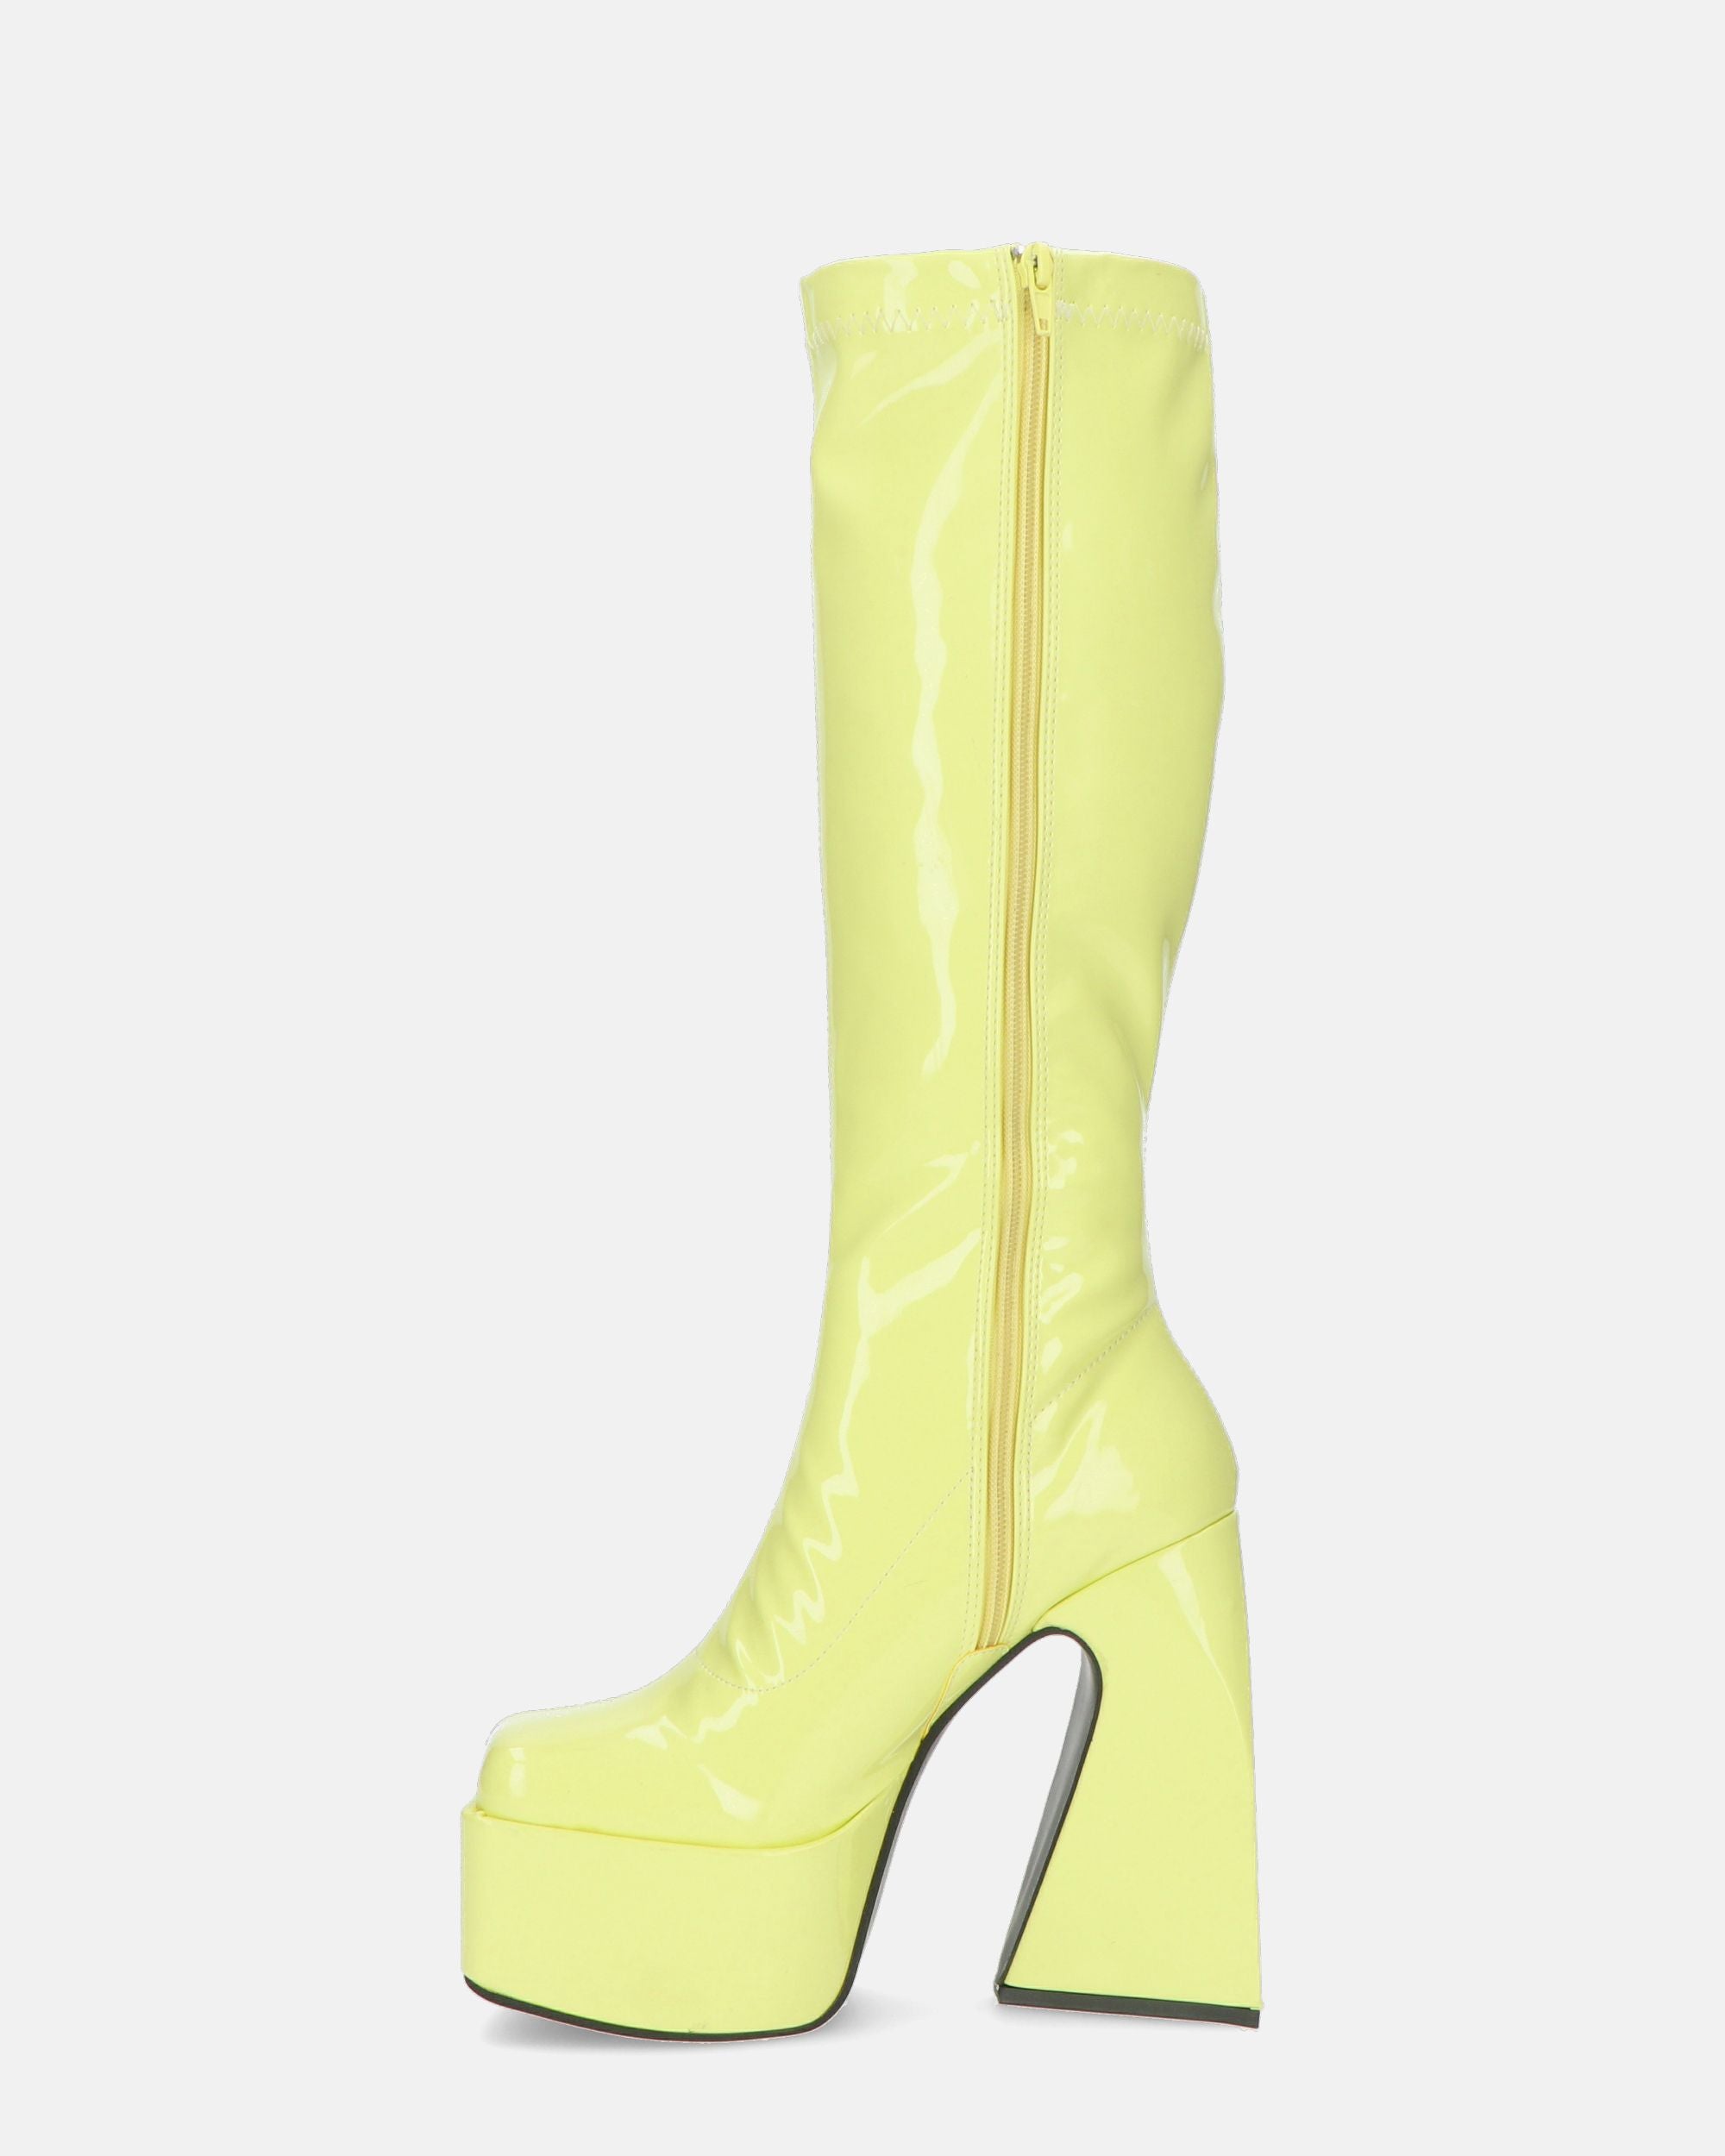 BECKA - high boots in yellow glassy with zip and square heel